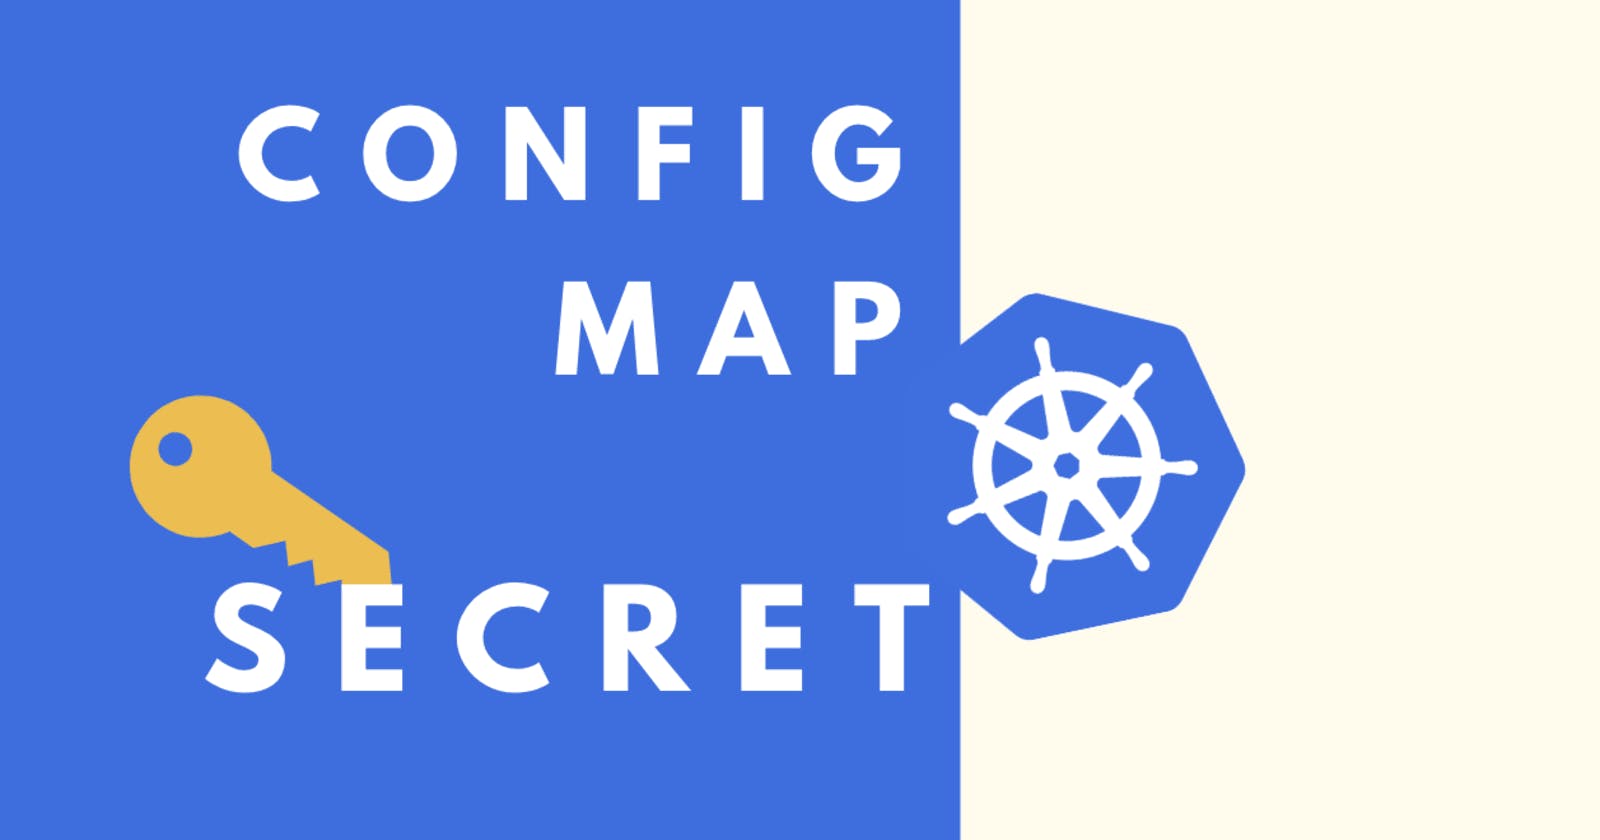 Mastering ConfigMaps and Secrets in Kubernetes